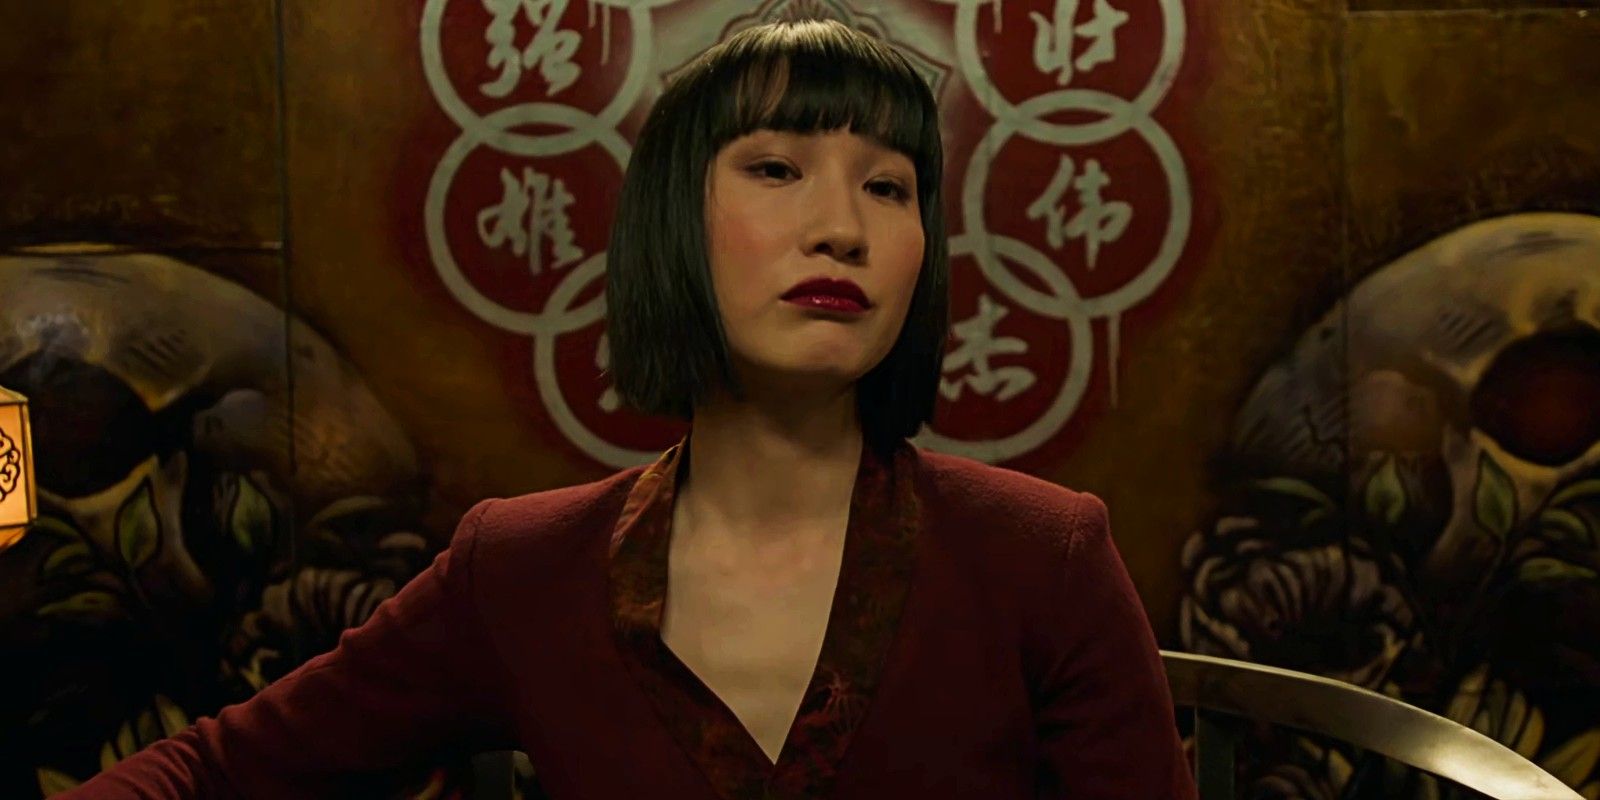 Xialing as the Ten Rings new leader in Shang-Chi's post-credit scene